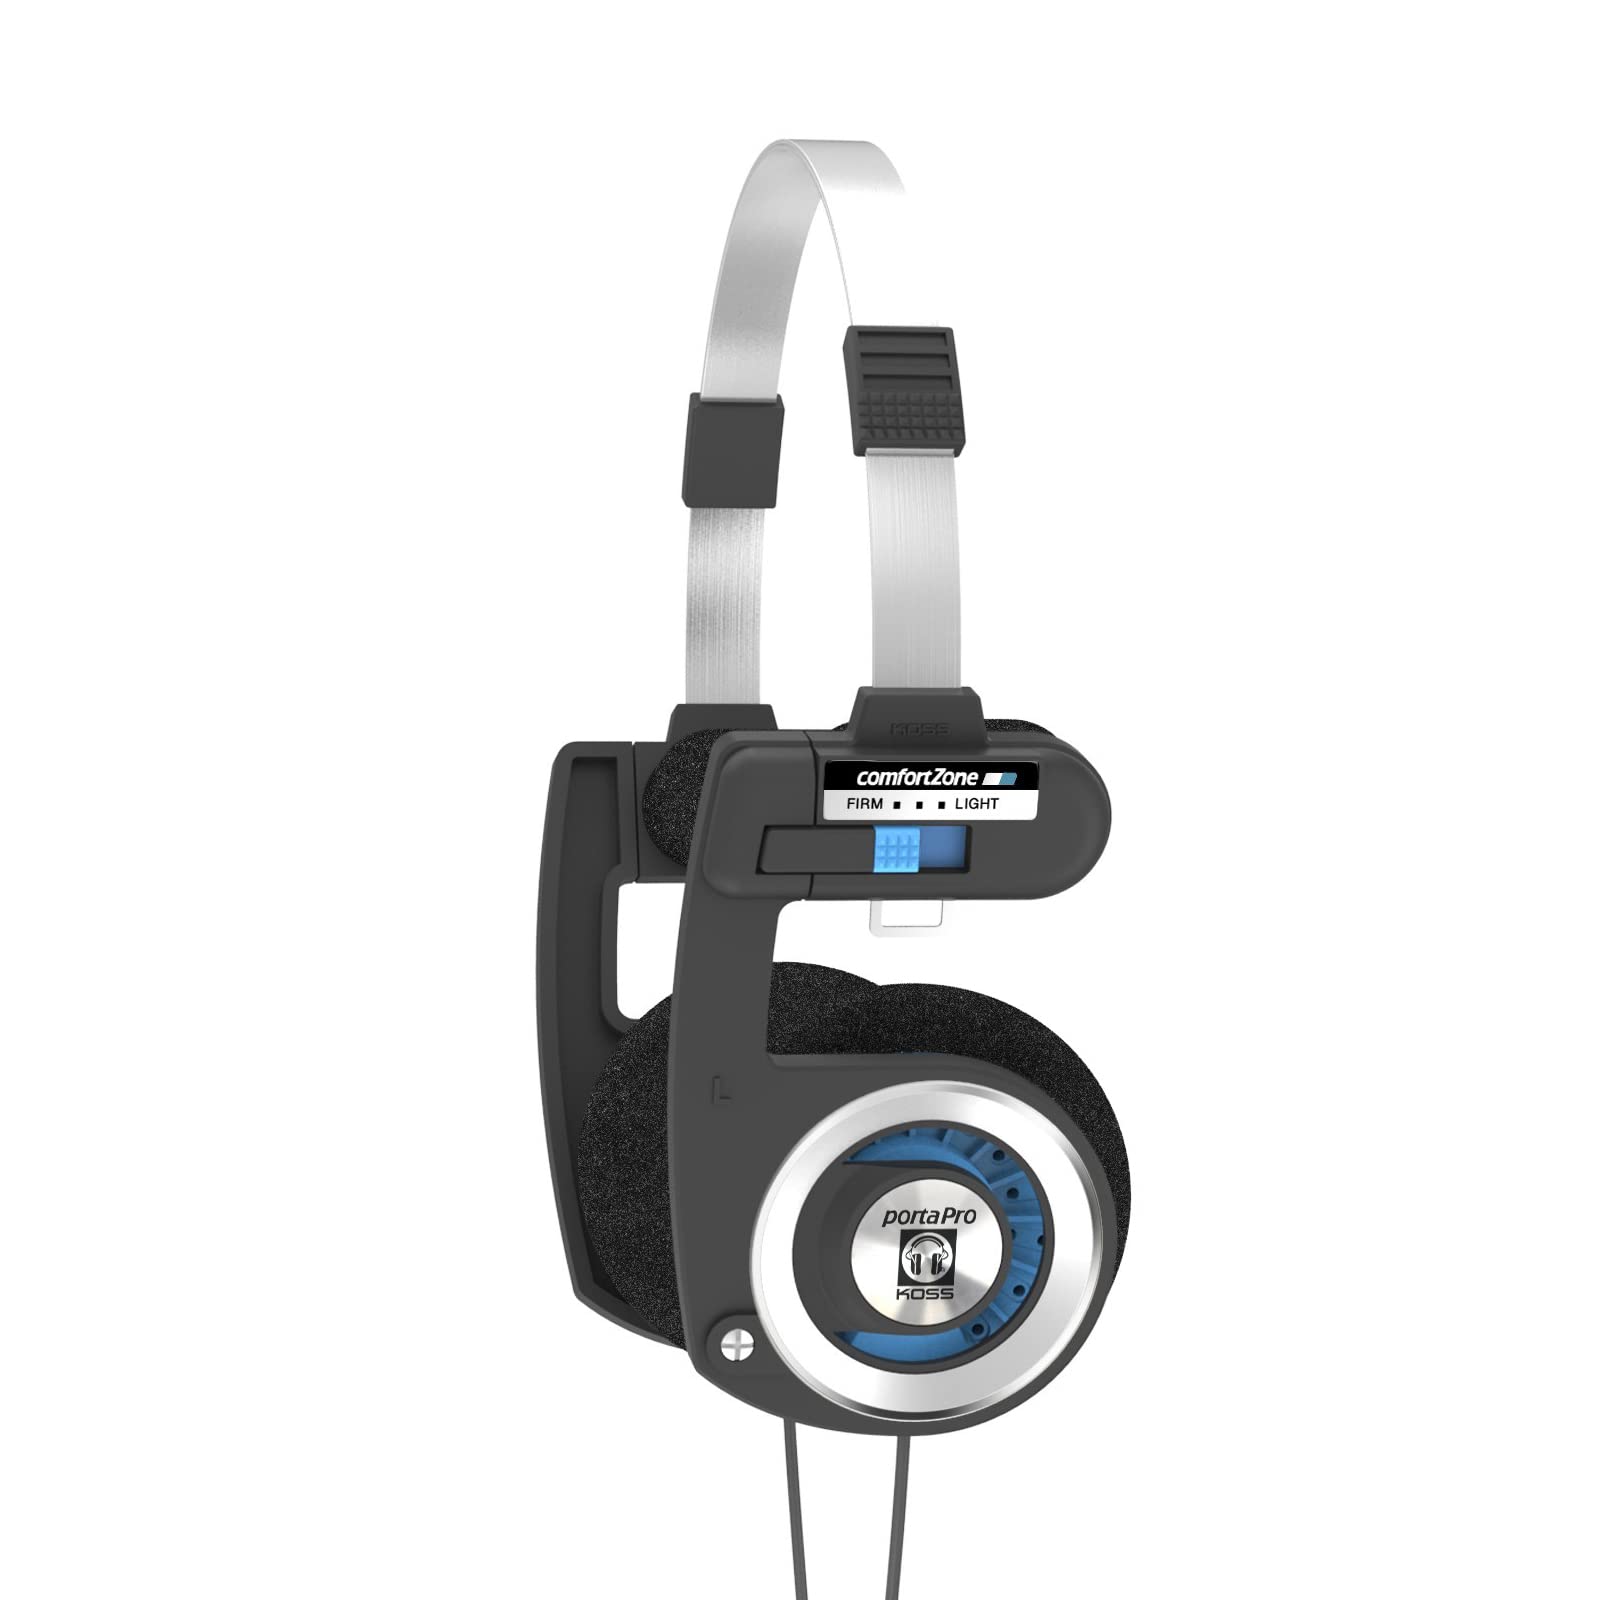 Koss Porta Pro On Ear Headphones with Case, Black / Silver - $27.99 at Koss Stereophones via Amazon